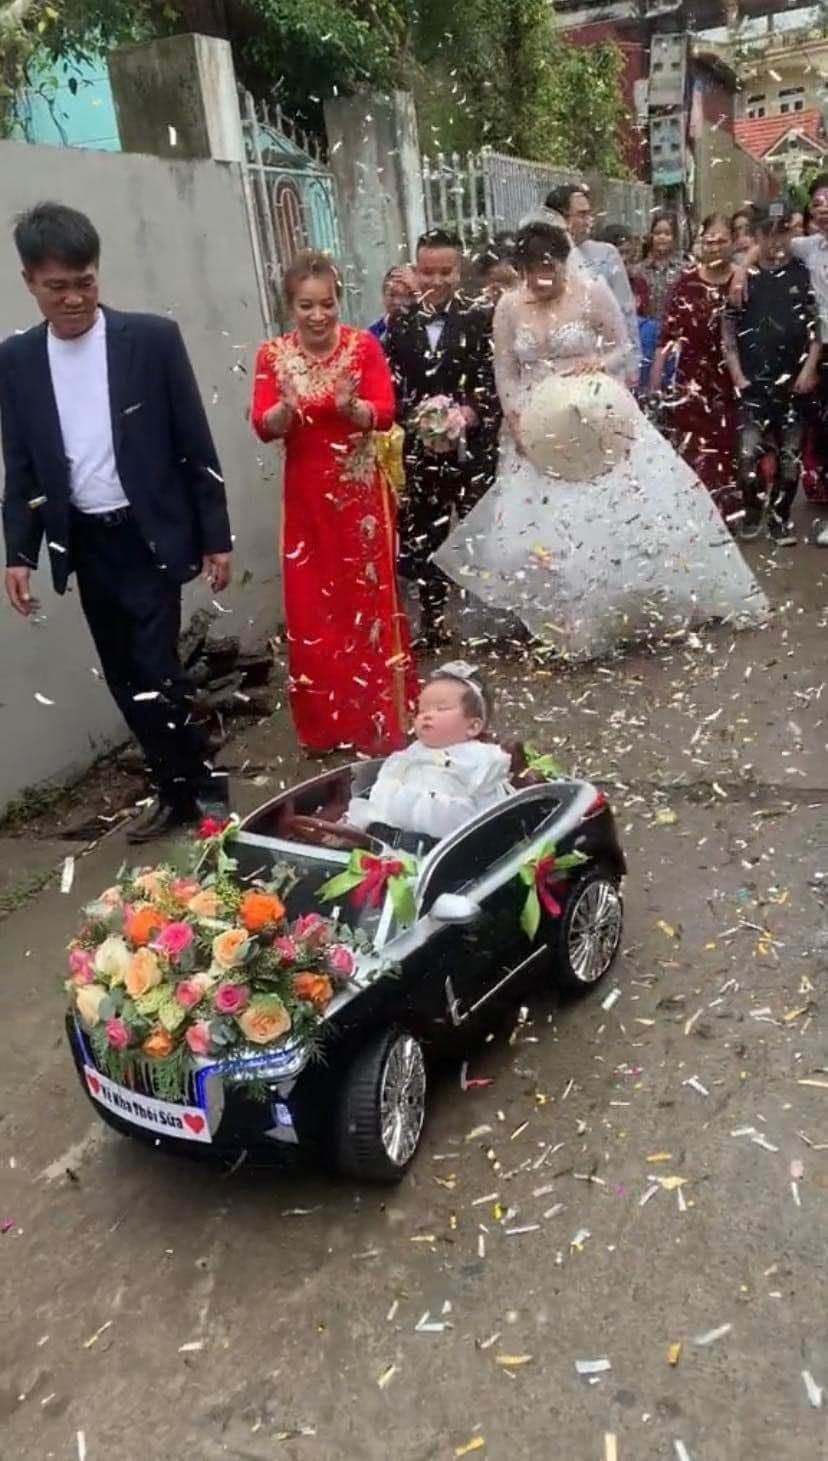 Funny scene of a baby sleeping on a 'flower car' in the middle of a royal procession of brides